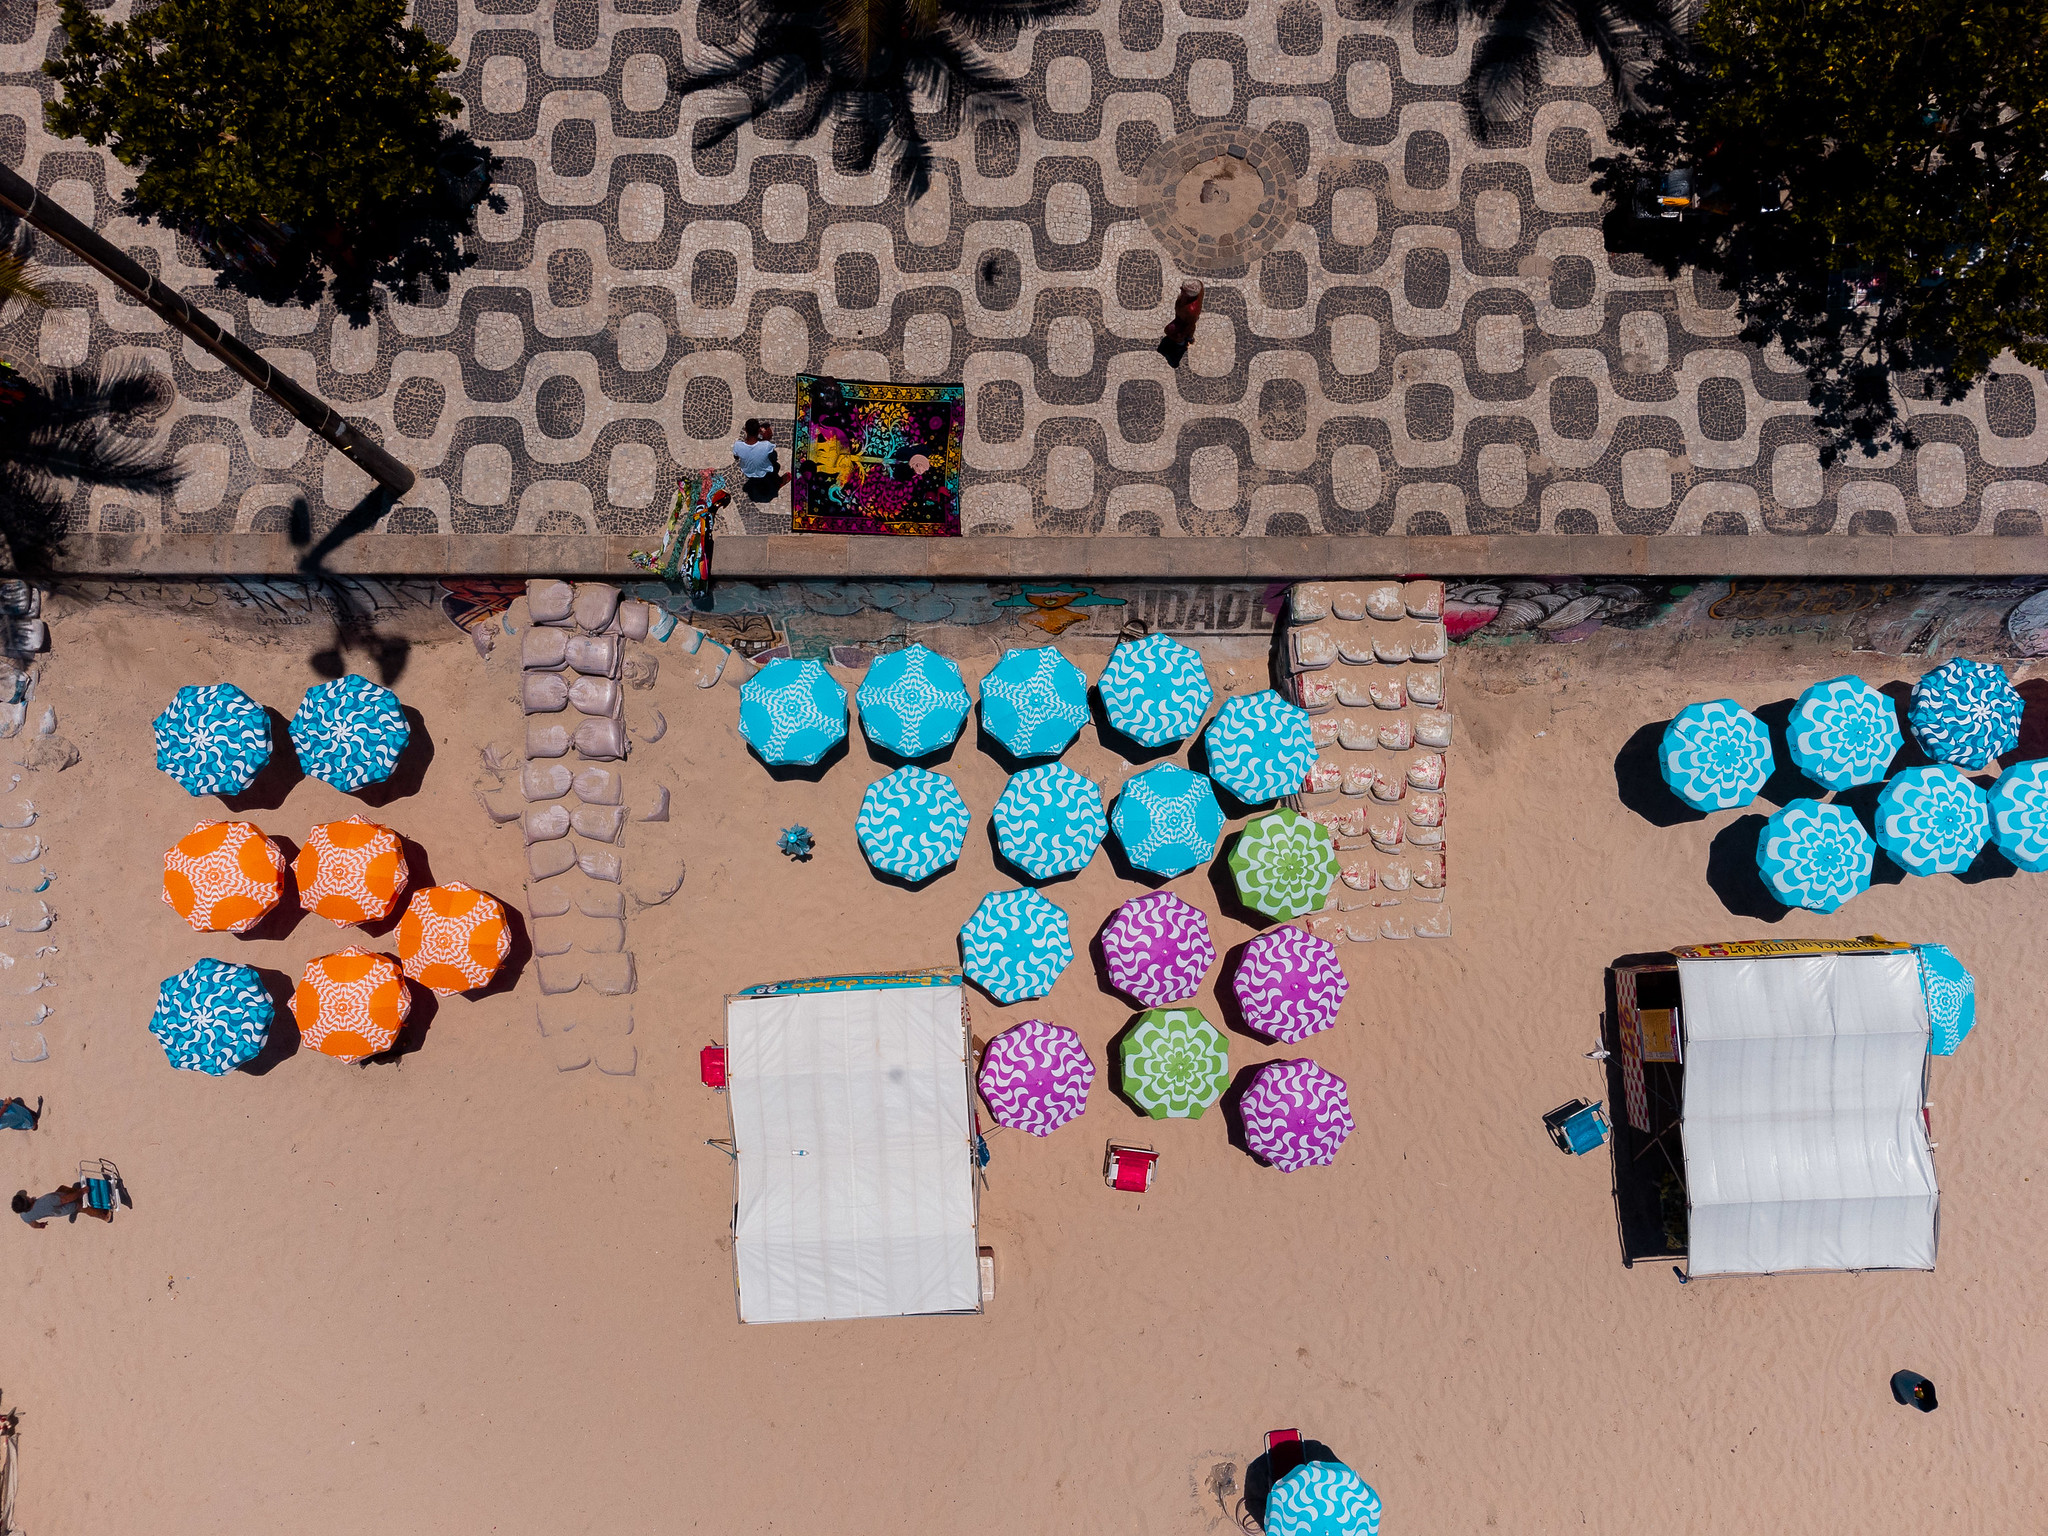 Aerial view of a beach where it meets a tiled walkway. There are clusters of beach umbrellas dotted around the sand.